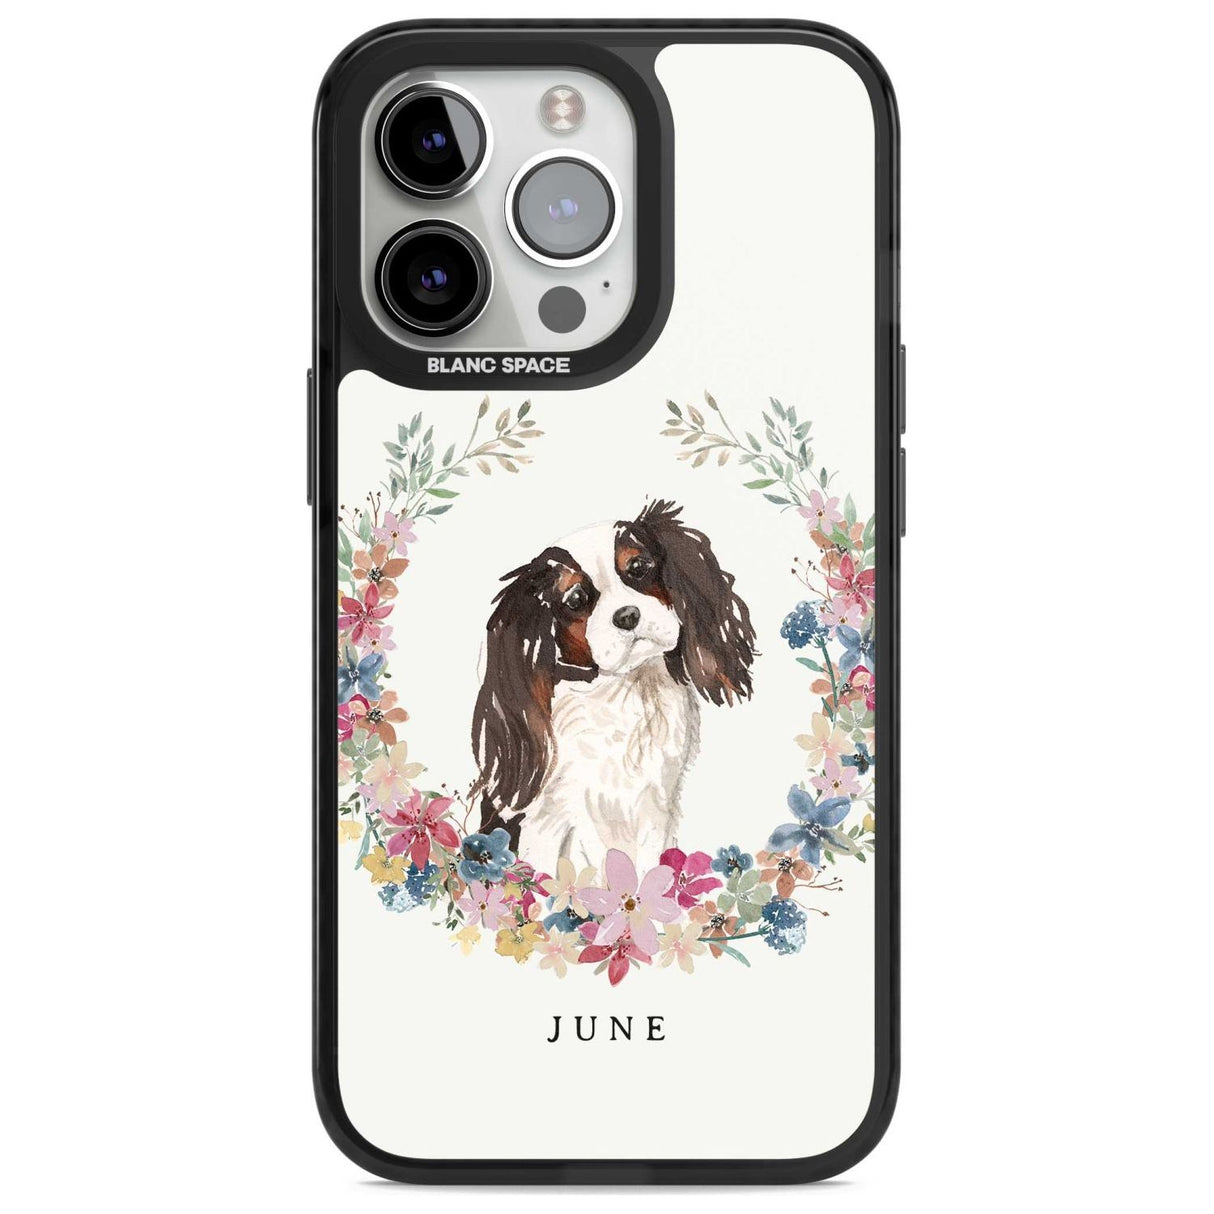 Personalised Tri Coloured King Charles Watercolour Dog Portrait Custom Phone Case iPhone 15 Pro Max / Magsafe Black Impact Case,iPhone 15 Pro / Magsafe Black Impact Case,iPhone 14 Pro Max / Magsafe Black Impact Case,iPhone 14 Pro / Magsafe Black Impact Case,iPhone 13 Pro / Magsafe Black Impact Case Blanc Space